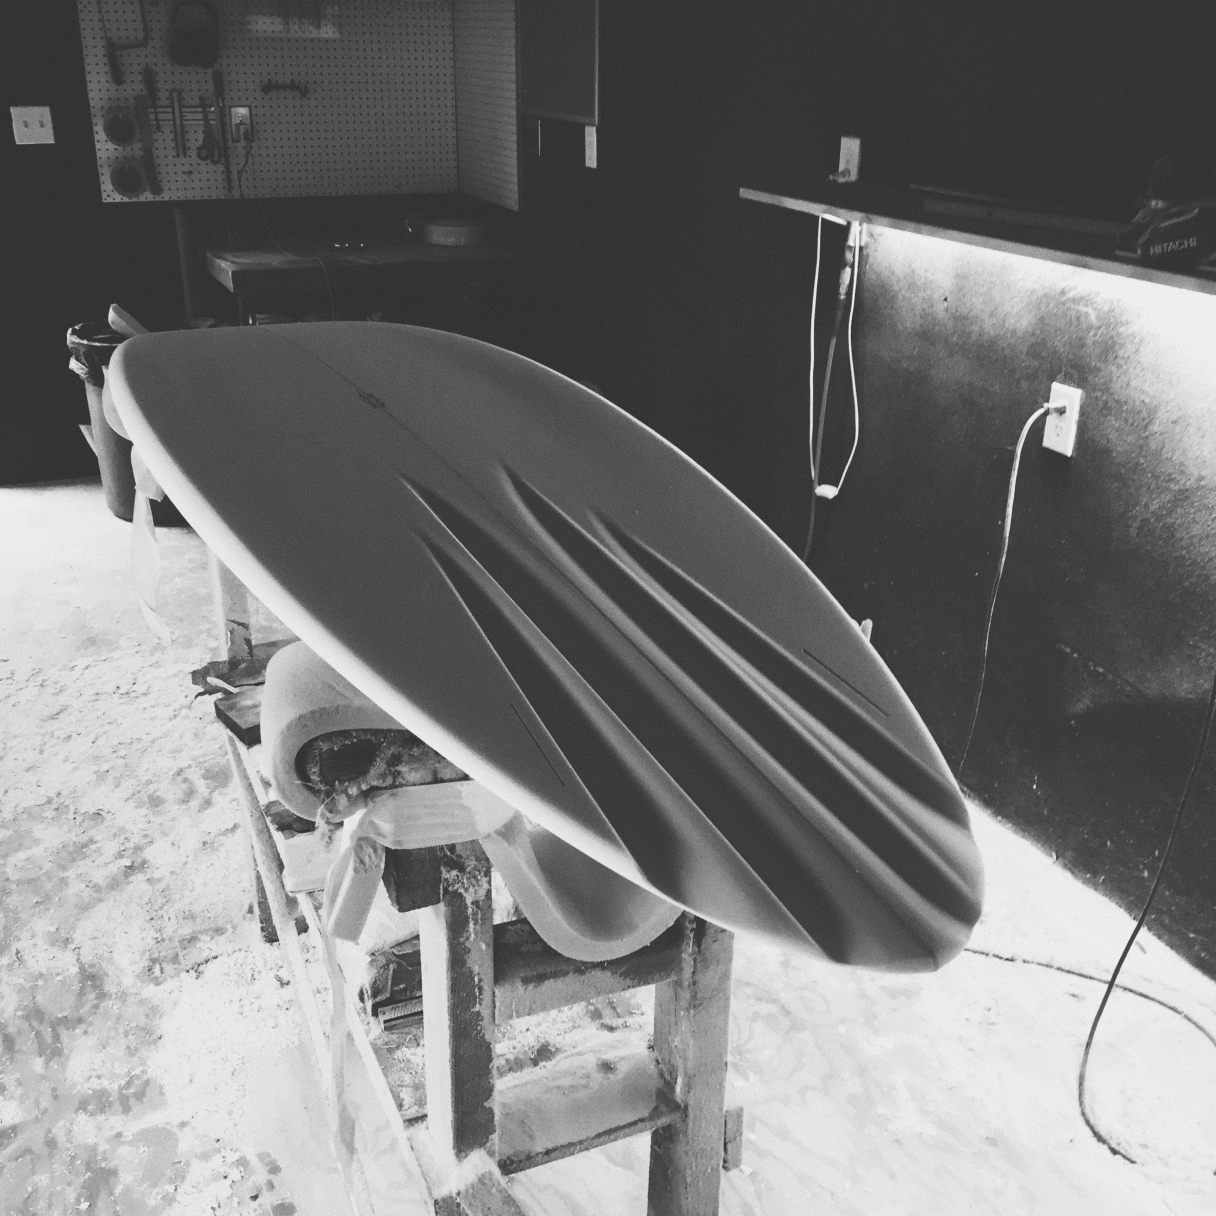 Hand shaped custom surfboard. Channel bottom twin fin from Somma Special Designs.